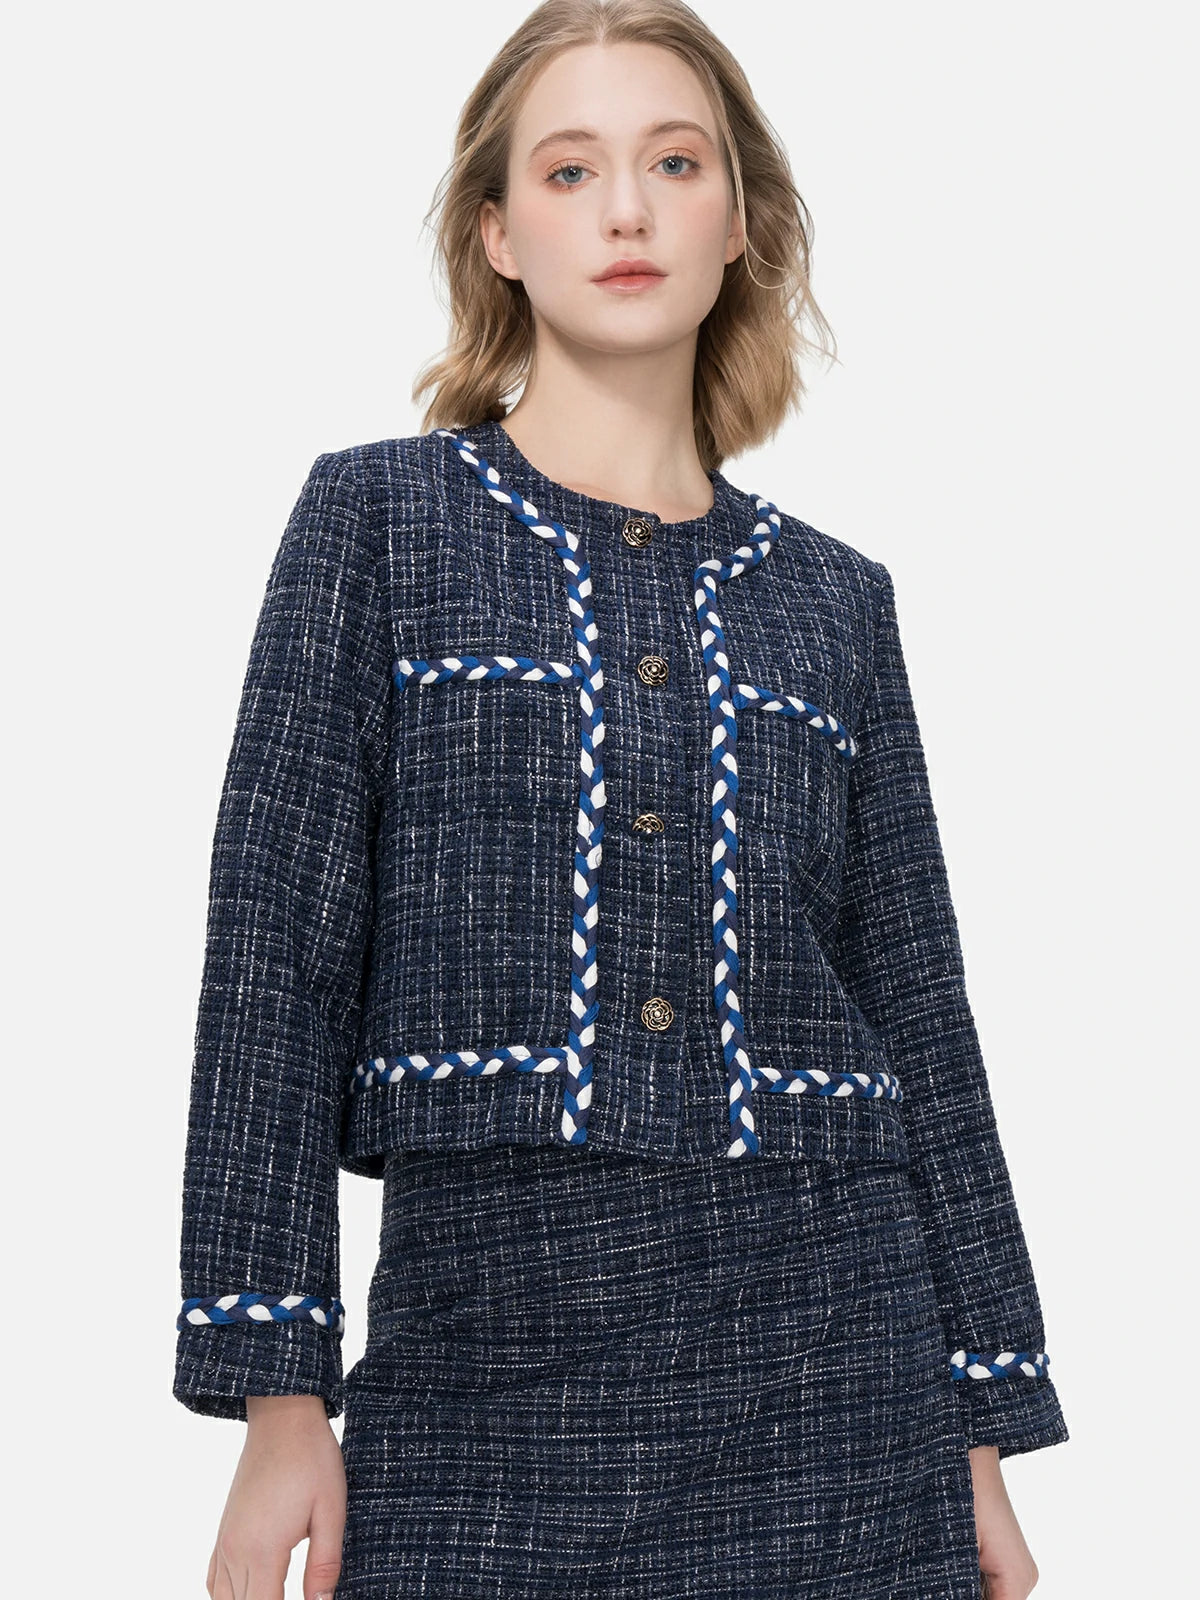 Elevate your style with this classic and elegant navy blue plaid jacket featuring camellia-shaped buttons, a tailored design.